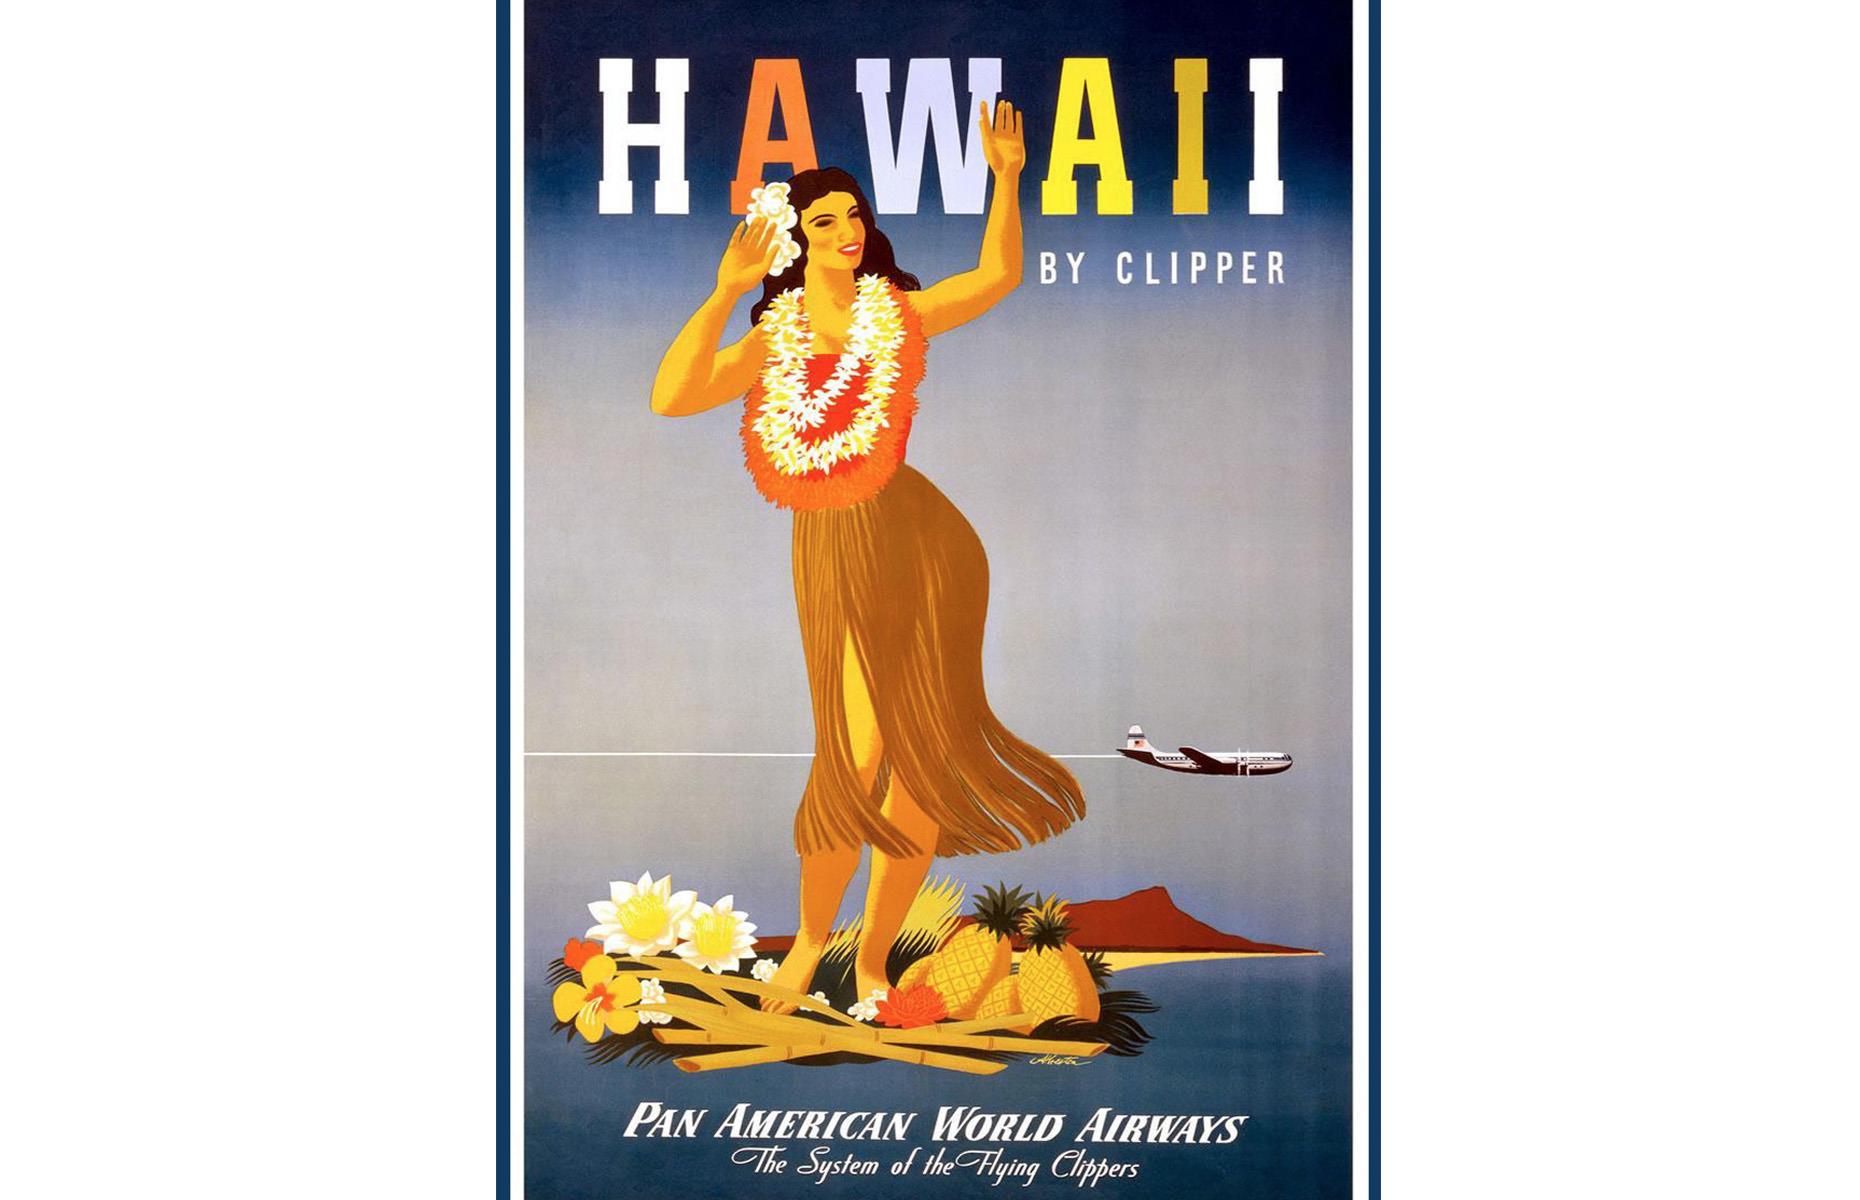 <p>Pan American Airways was once America's star airline, an aviation heavyweight from the Twenties right up until it collapsed in 1991. The carrier whisked passengers to all corners of the globe in its famous "clipper" planes and here it advertises its Hawaii routes. A female hula dancer is depicted in traditional dress, including a grass skirt. </p>  <p><a href="https://www.loveexploring.com/gallerylist/86315/how-air-travel-has-changed-in-every-decade-from-the-1920s"><strong>See how air travel has changed in every decade from the 1920s</strong></a></p>